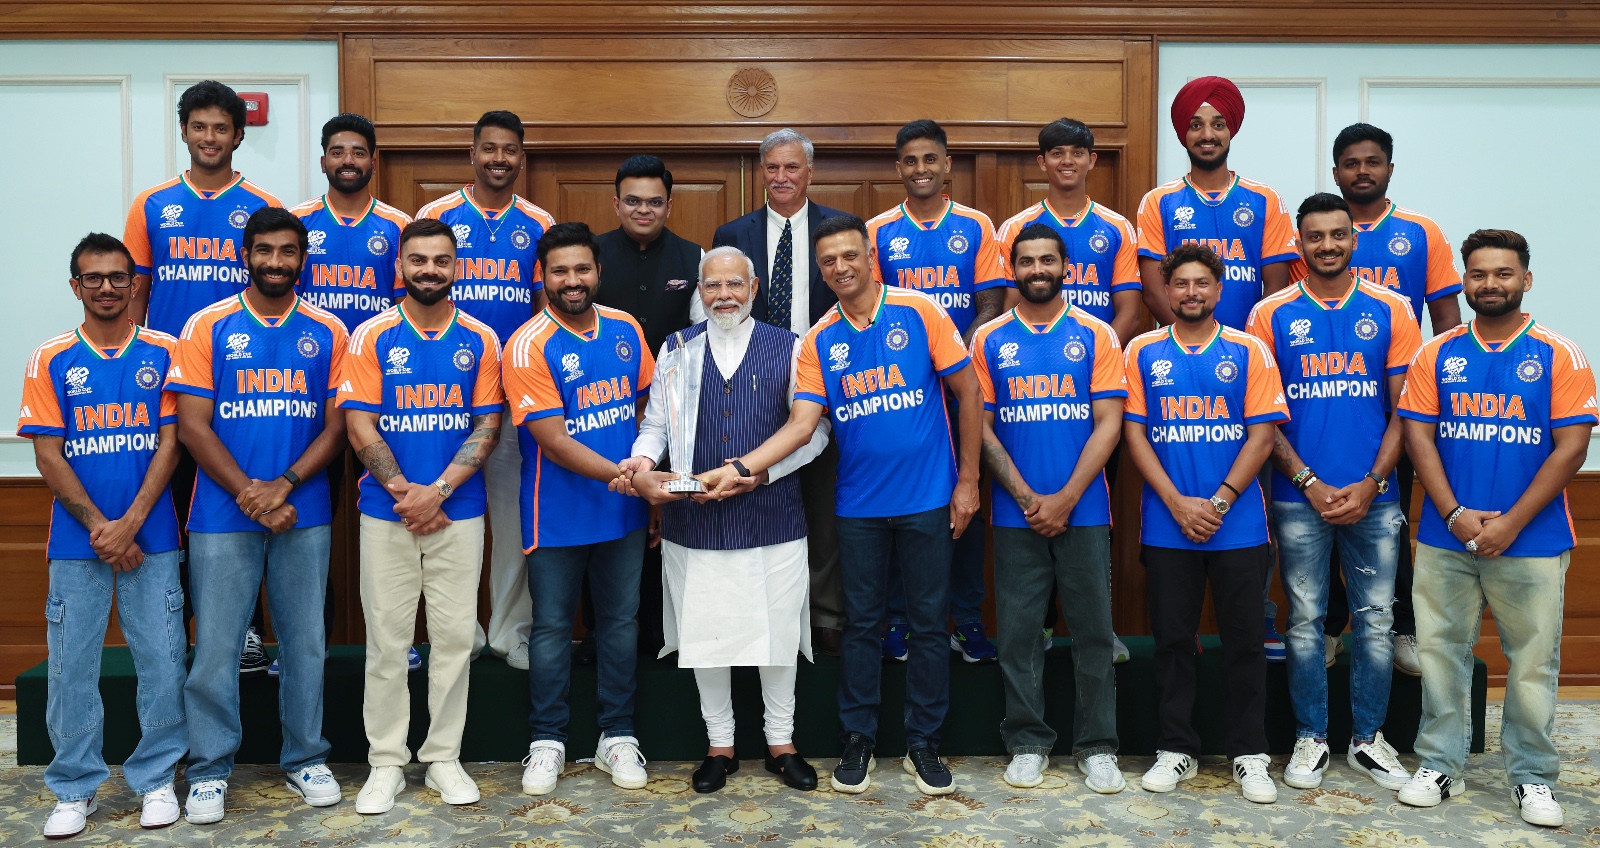 PM Modi: An excellent meeting with our Champions!   Hosted the World Cup winning team at 7, LKM and had a memorable conversation on their experiences through the tournament